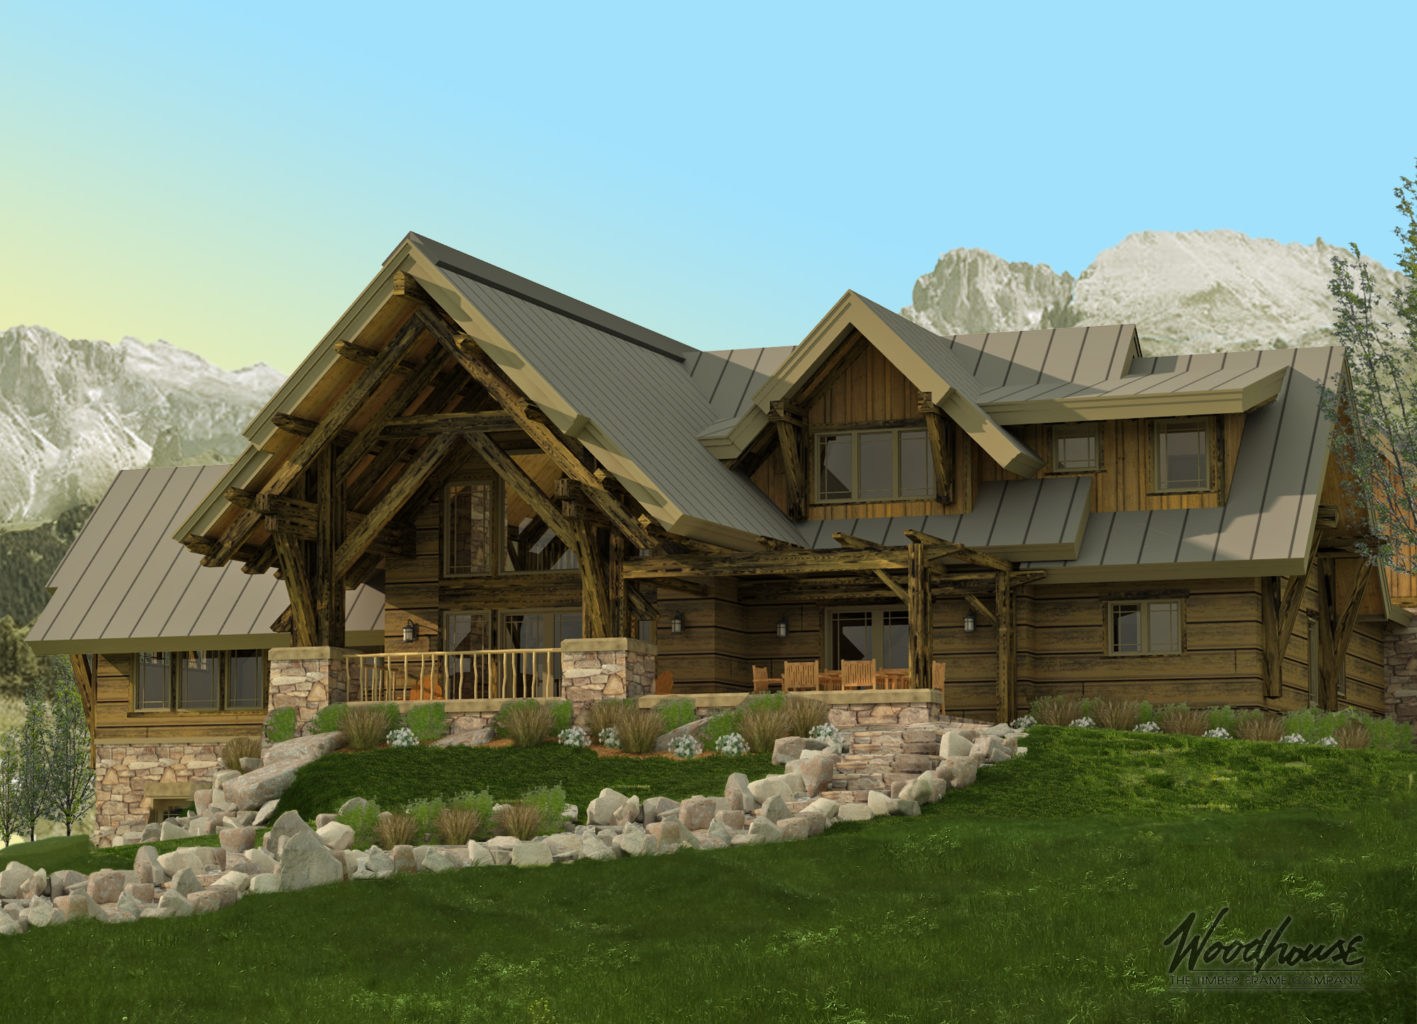 GrizzlyPeak Floor Plan - Woodhouse, The Timber Frame Company